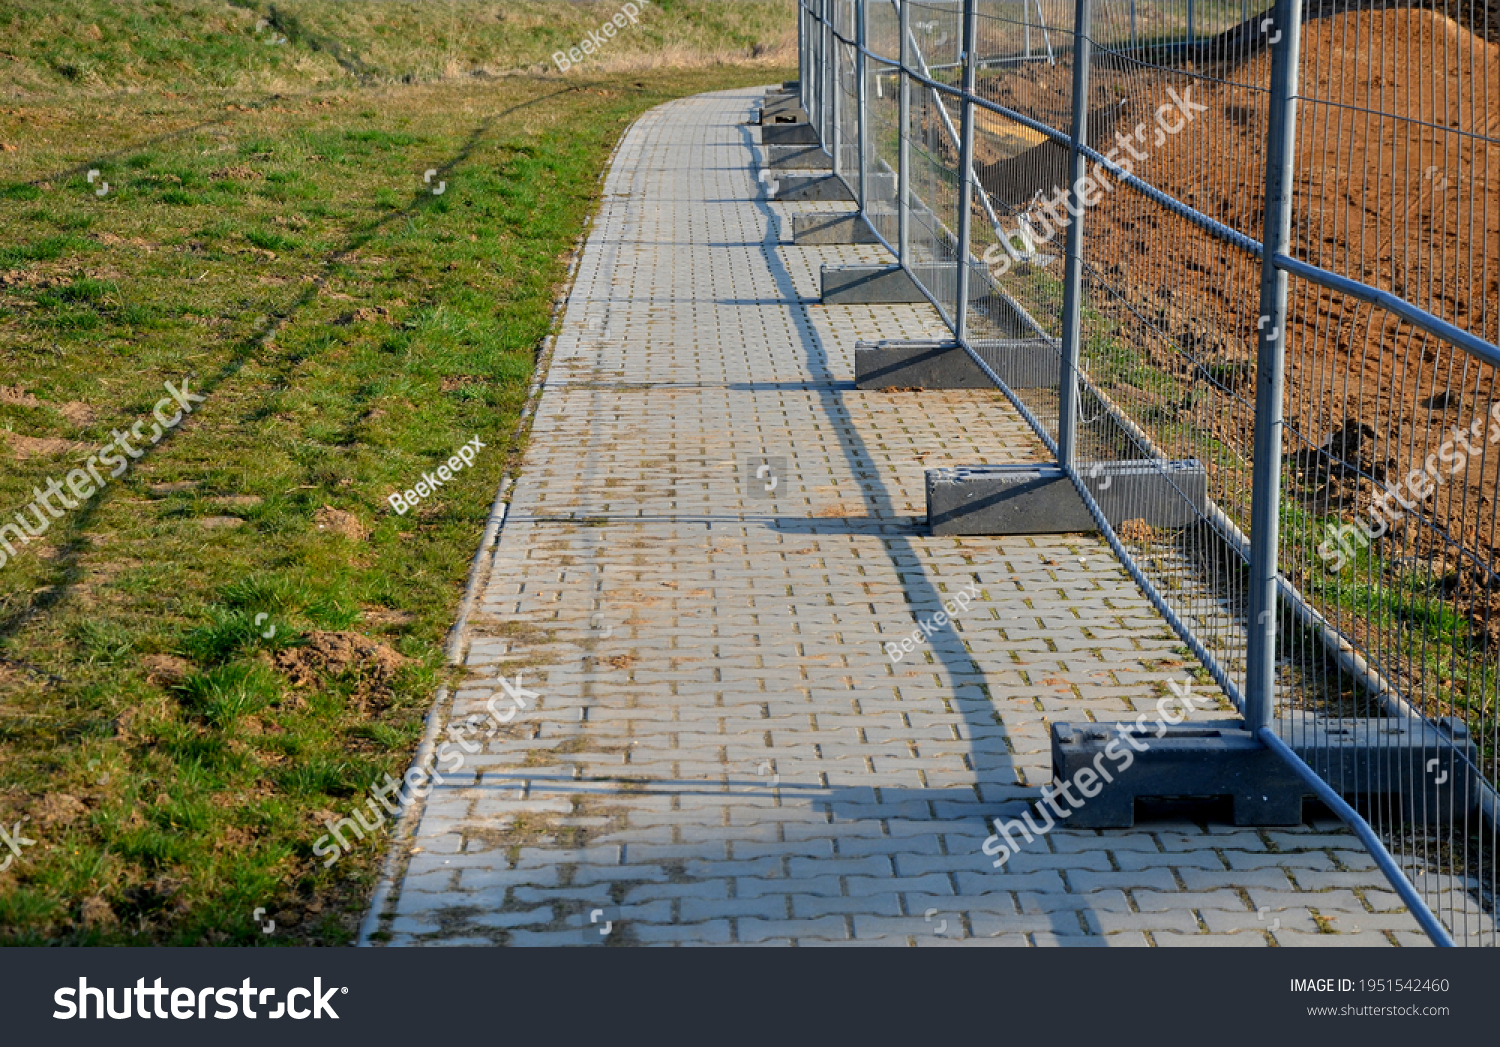 Construction sites with portable fence parts that are installed in plastic weight racks hold the stability of the fencing. along the sidewalk made of interlocking paving #1951542460